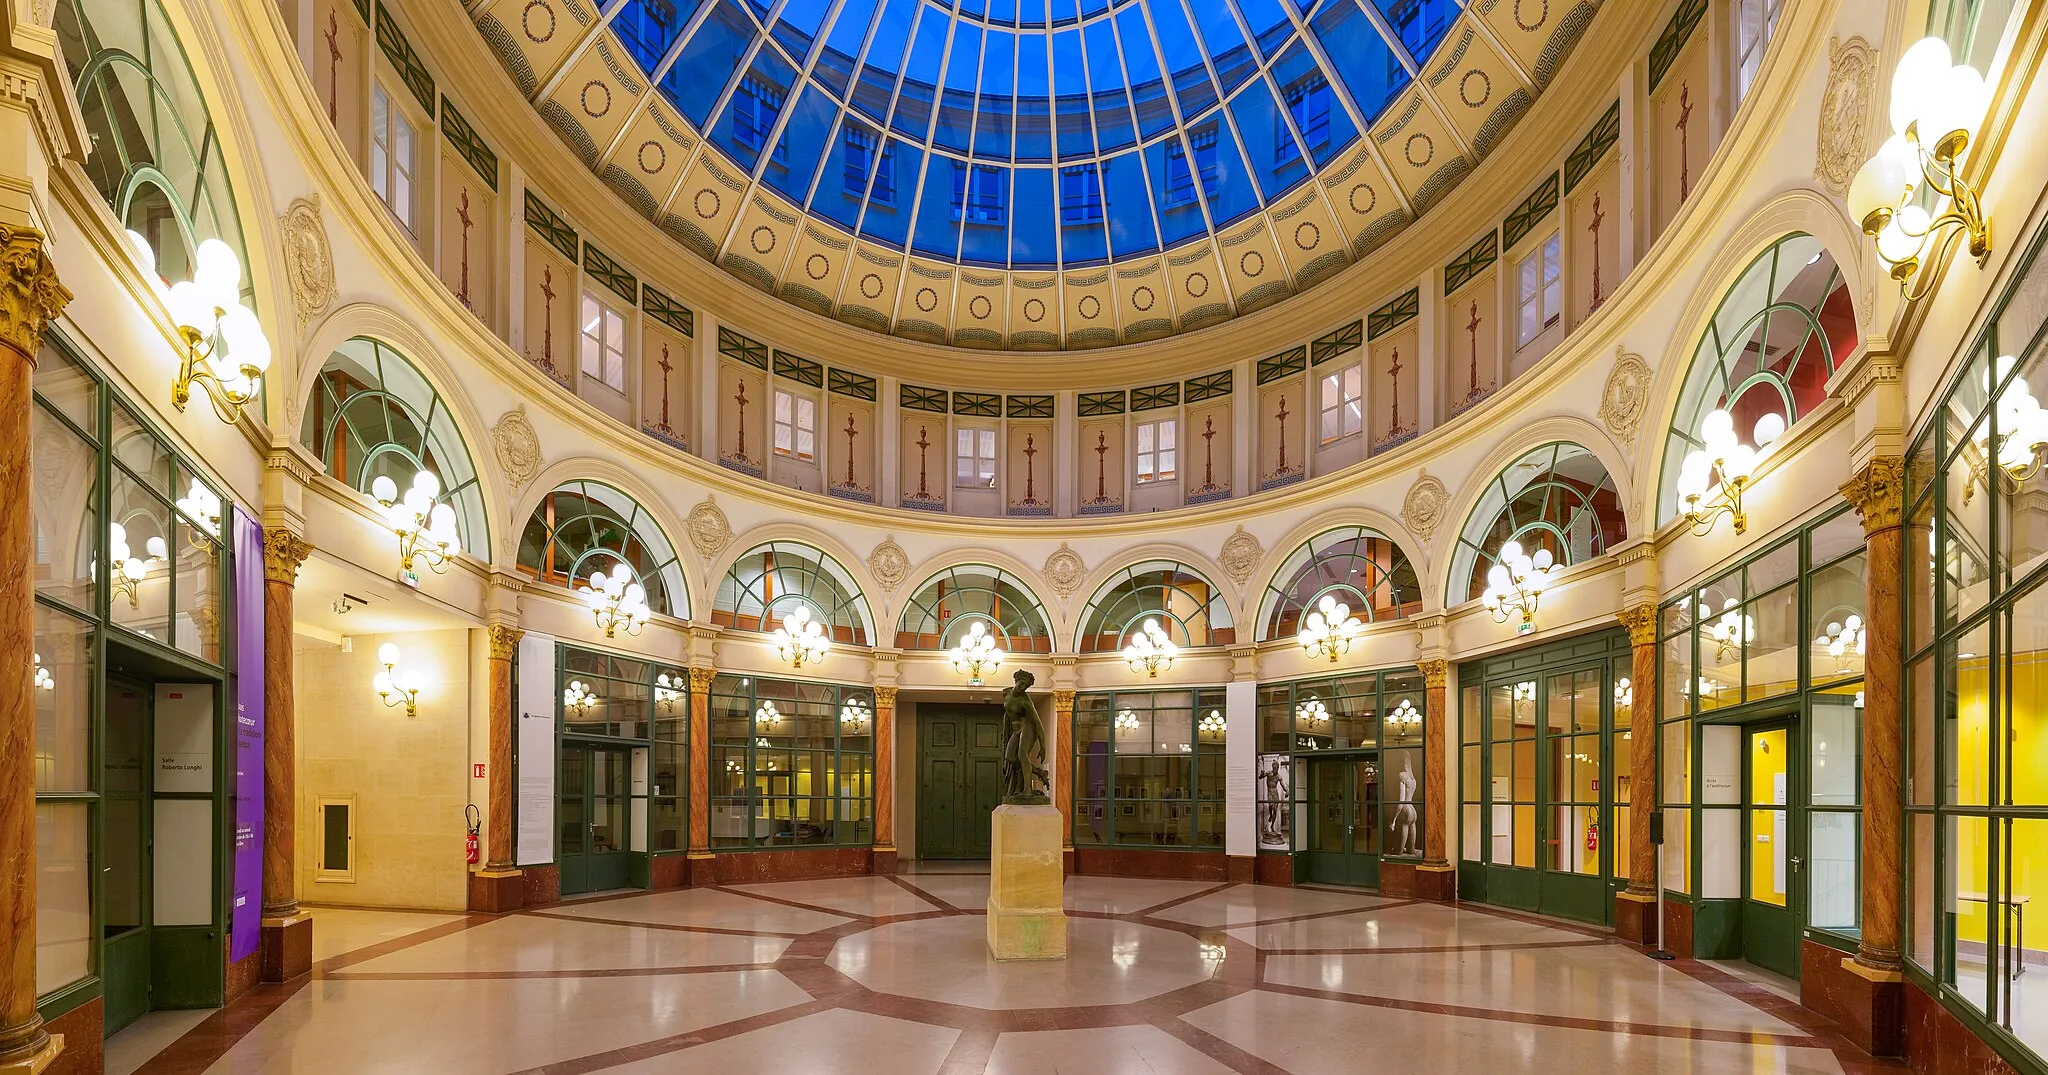 Photo showing: Rotunda of the Galerie Colbert (Colbert Galleria), Paris, 2nd arrondissement. Built in 1826 as a rival to the adjacent and then very popular Vivienne covered passageway, it didn't achieve the same success and was almost abandoned until renovation in the 1980s. Bought by French National Library, the galerie is now home to INHA (Institut National de l'Histoire des Arts, Art History National Institute) and INP (Institut National du Patrimoine, Heritage National Institute).